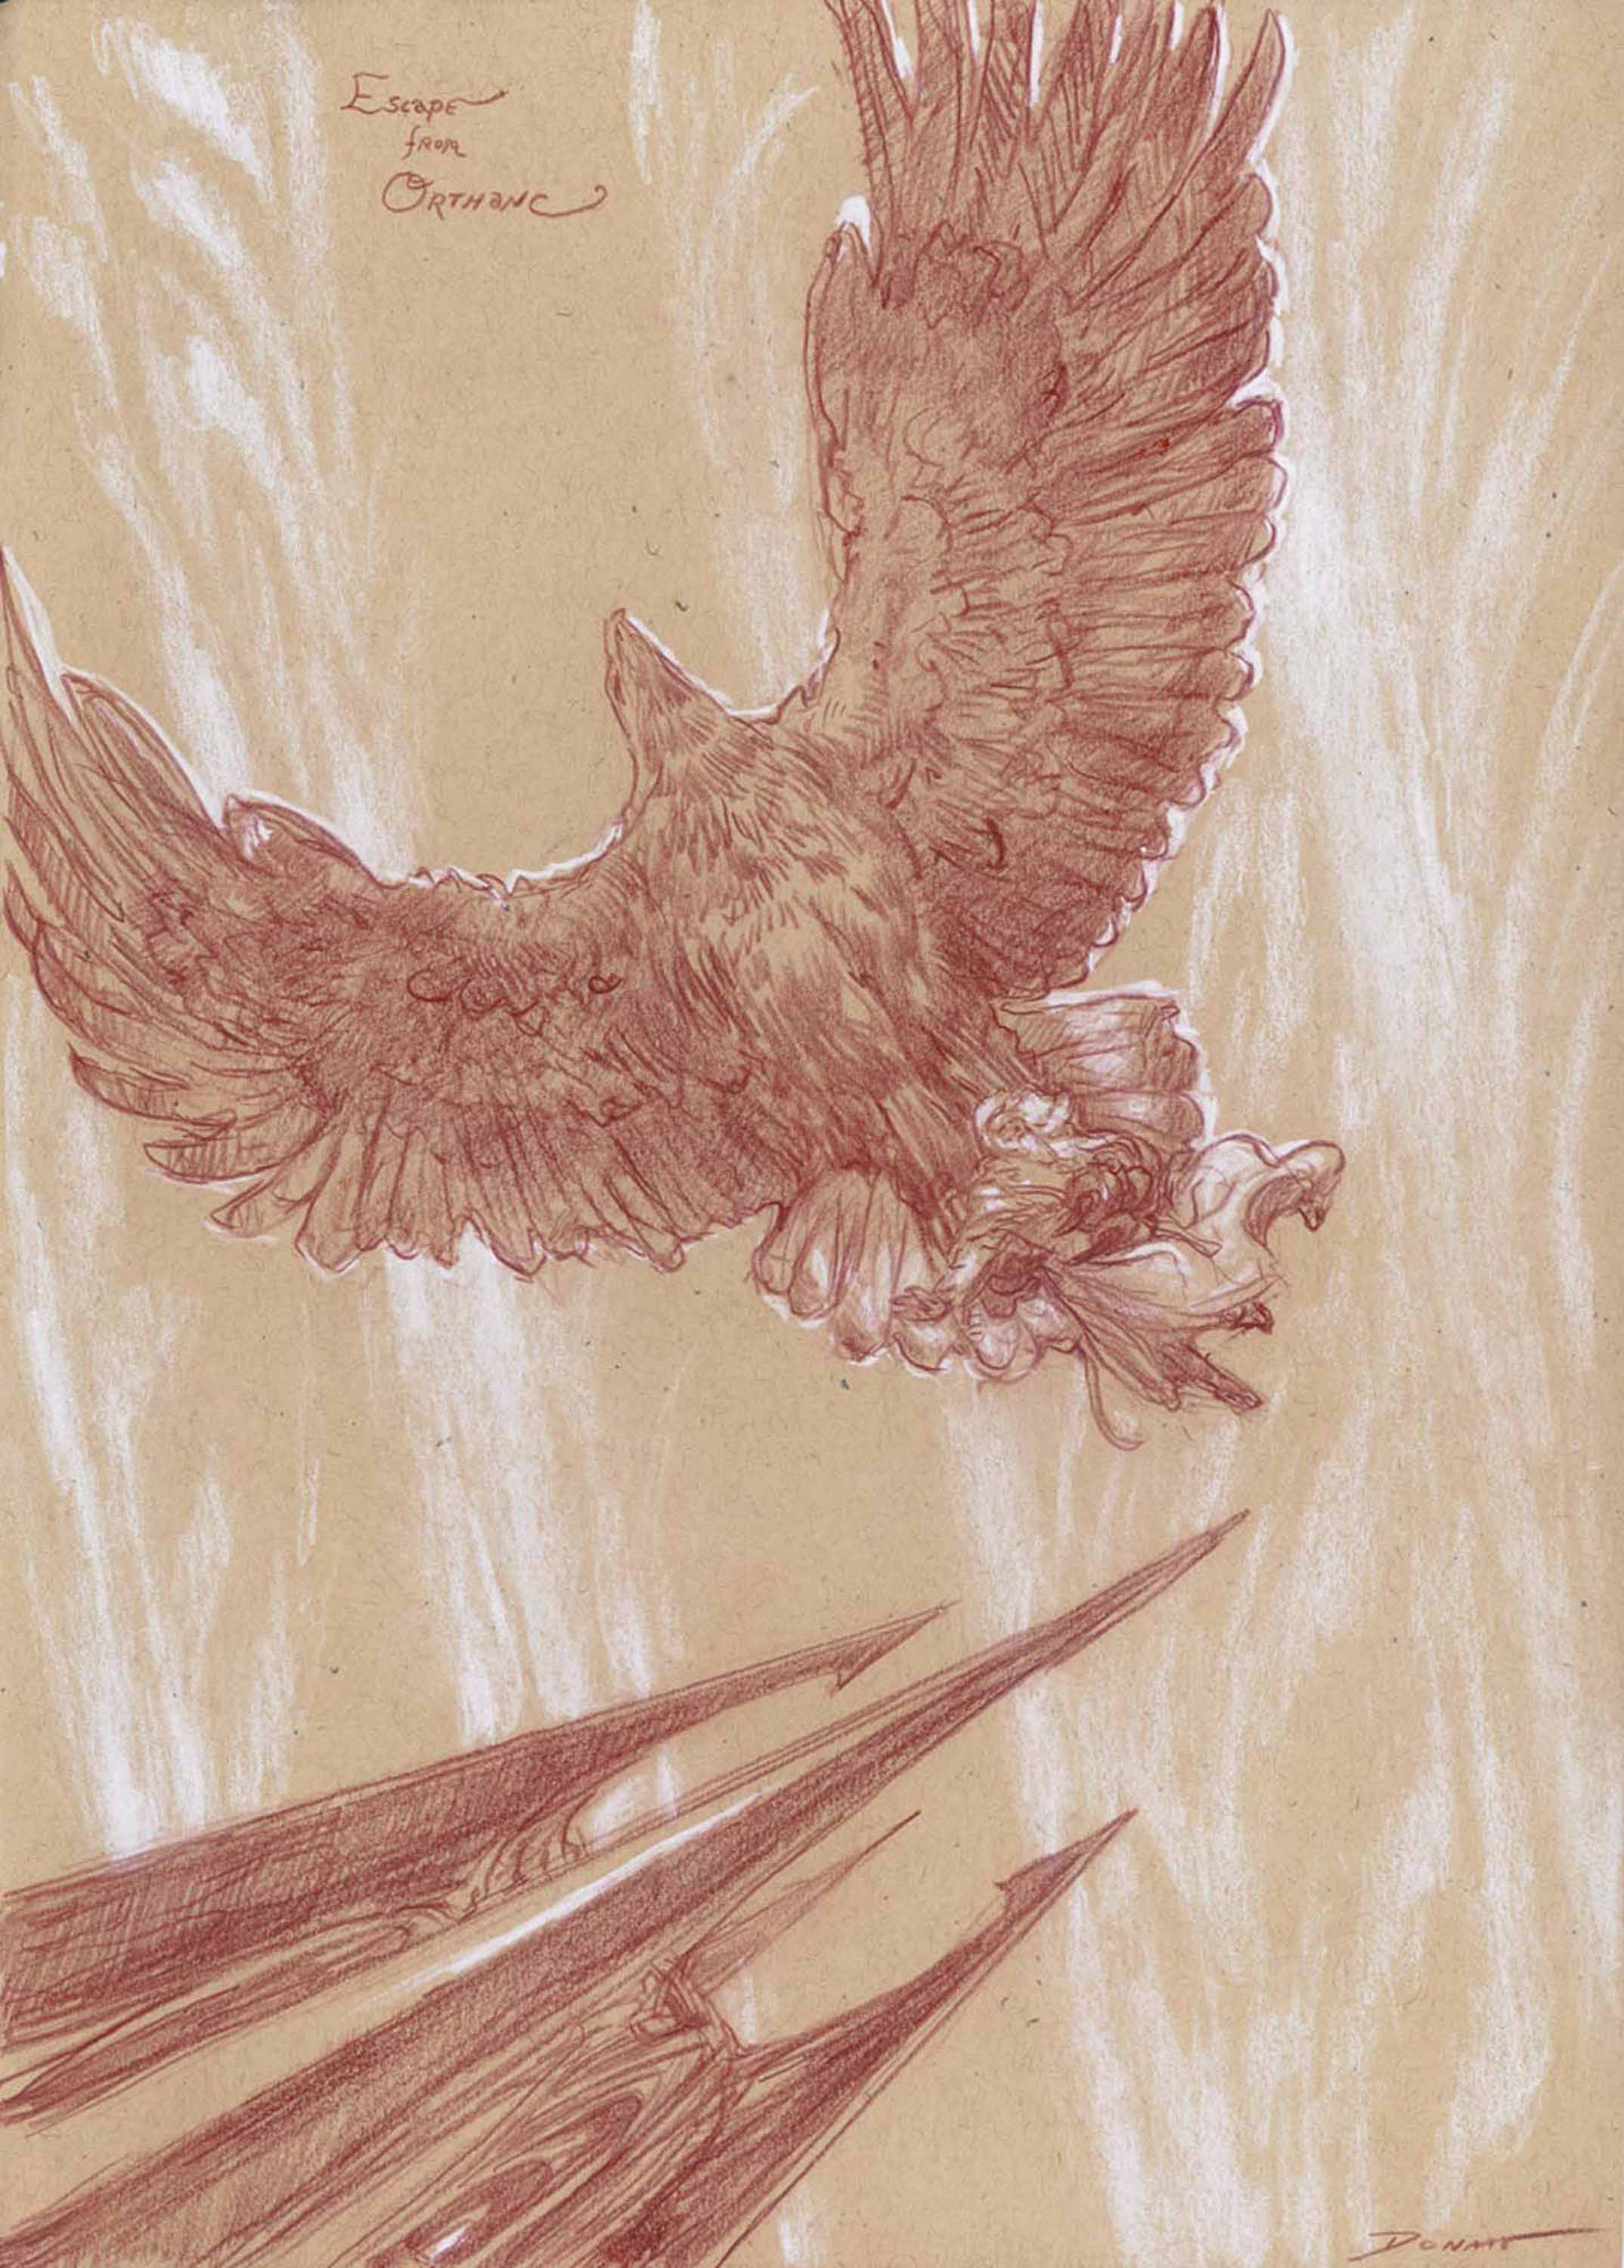 Escape from Orthanc
11" x 8"  Watercolor Pencil and Chalk on Toned paper 2012
private collection